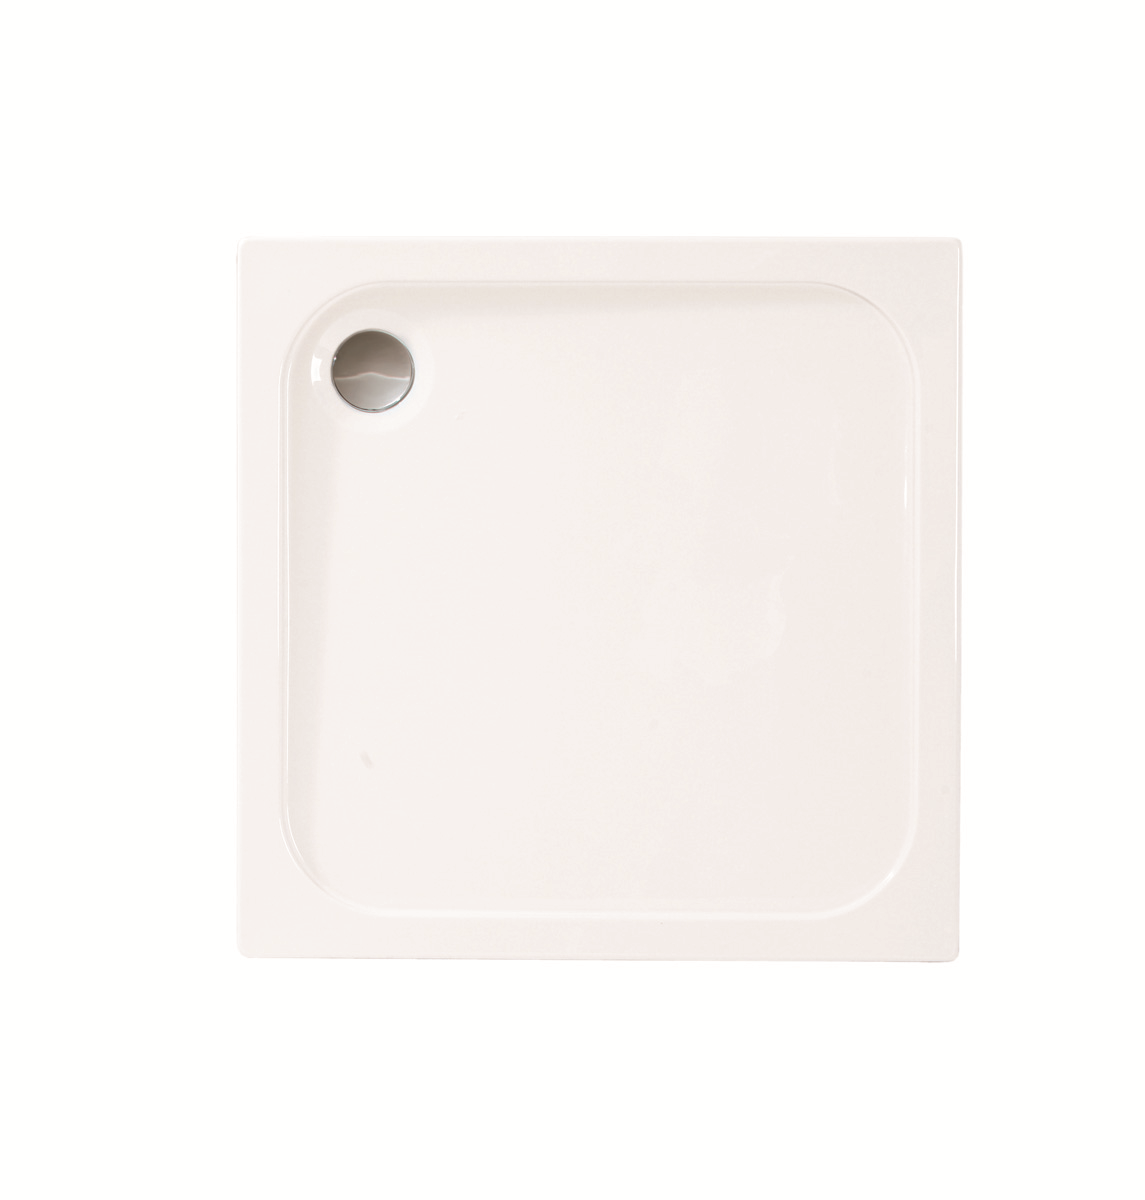 Merlyn Mstone Square Shower Tray 760mm White [D76SQ]